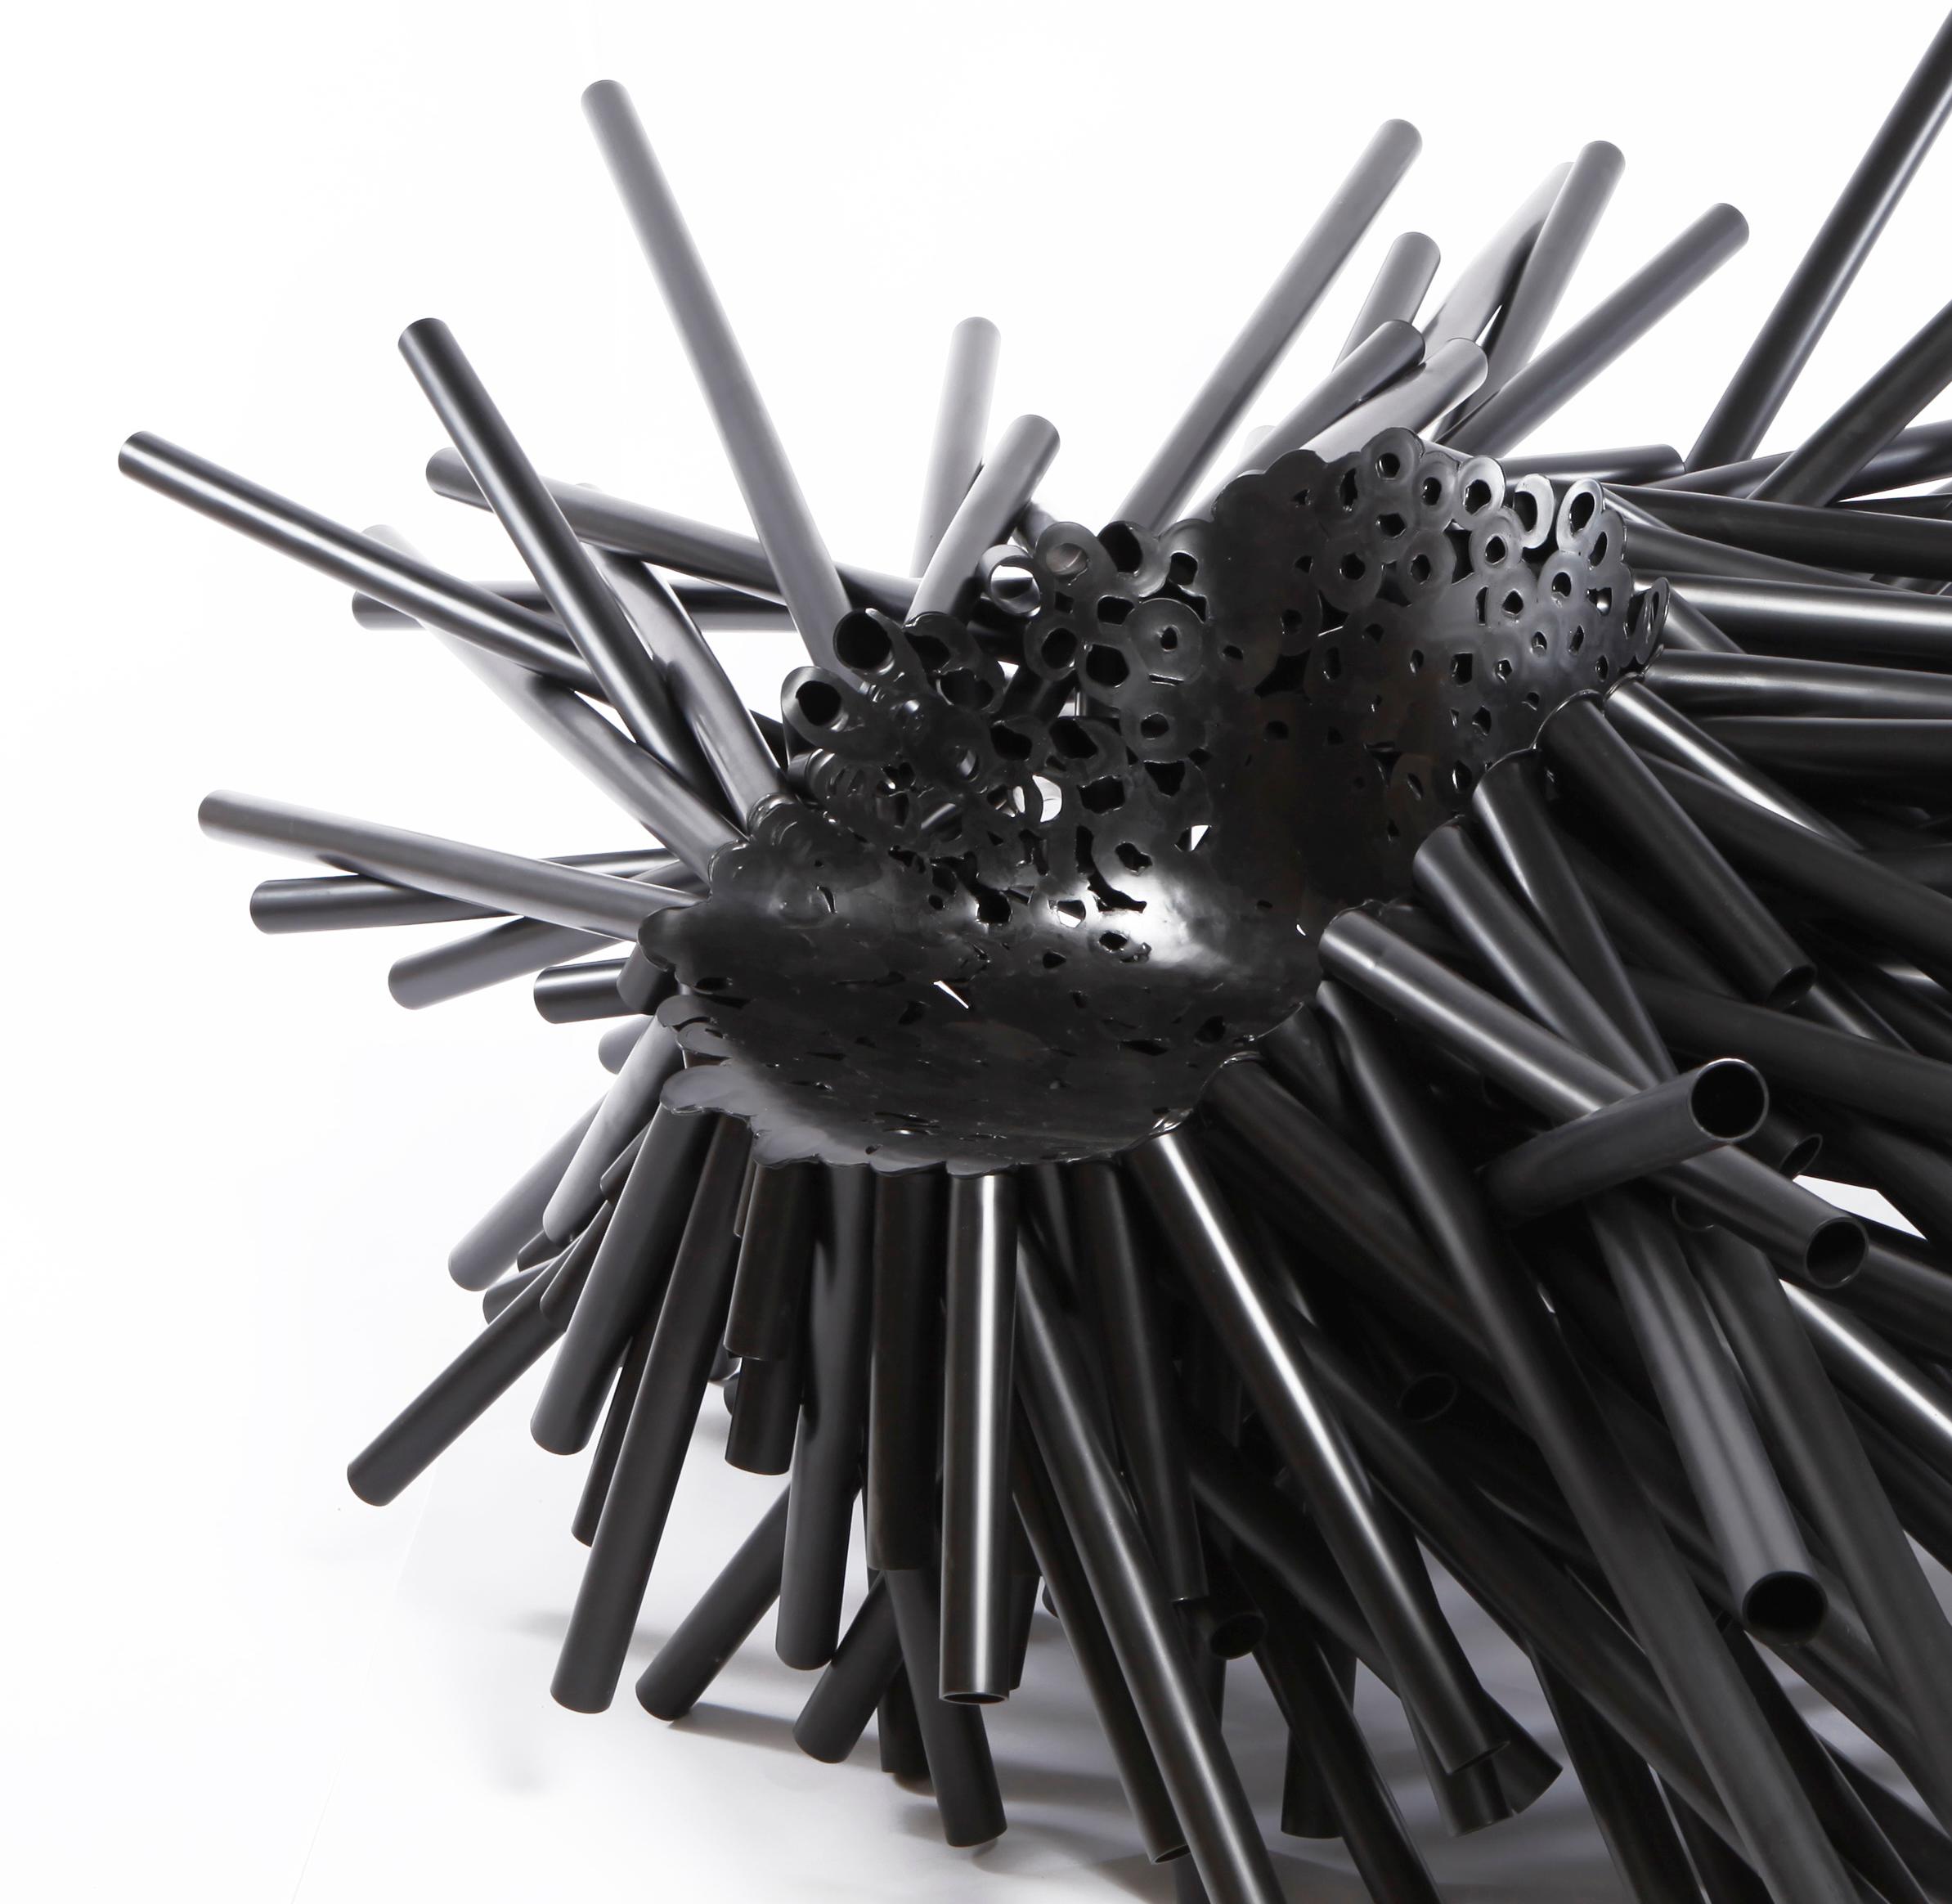 Hand-Crafted Meltdown Chair, PP Tube #1 Black by Tom Price, Contemporary, Limited Edition For Sale